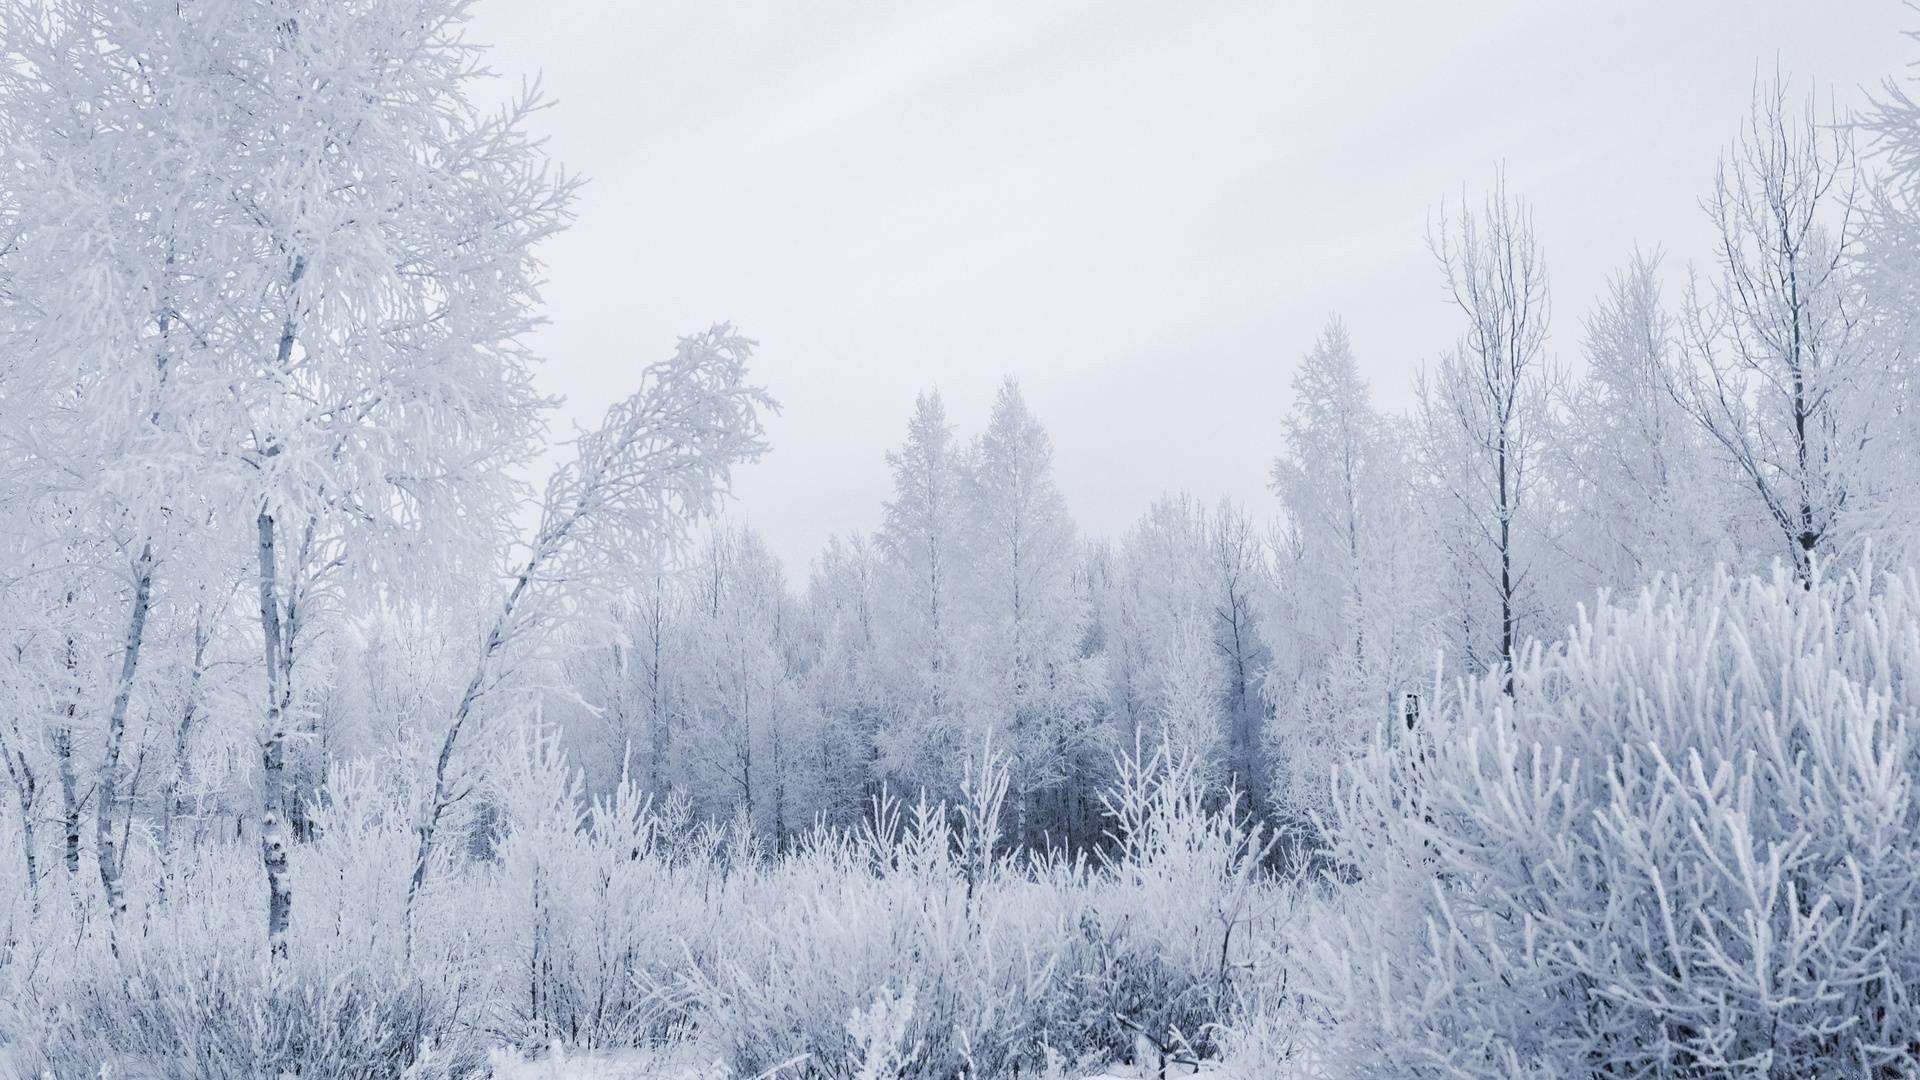 Snowy Forest Wallpaper, Landscapes Nature Winter Snow Forest Land